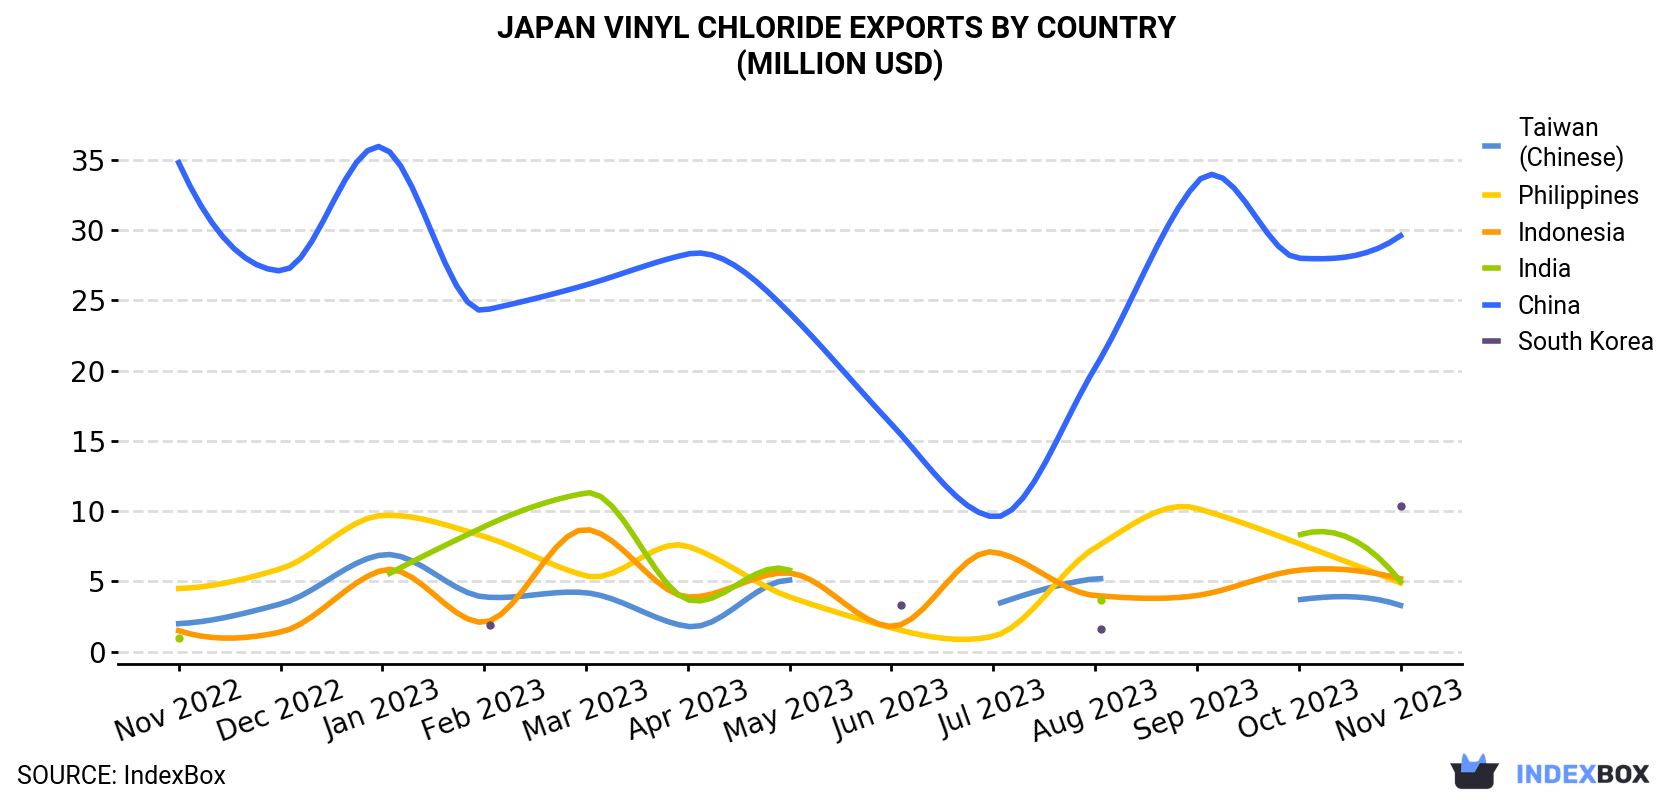 Japan Vinyl Chloride Exports By Country (Million USD)